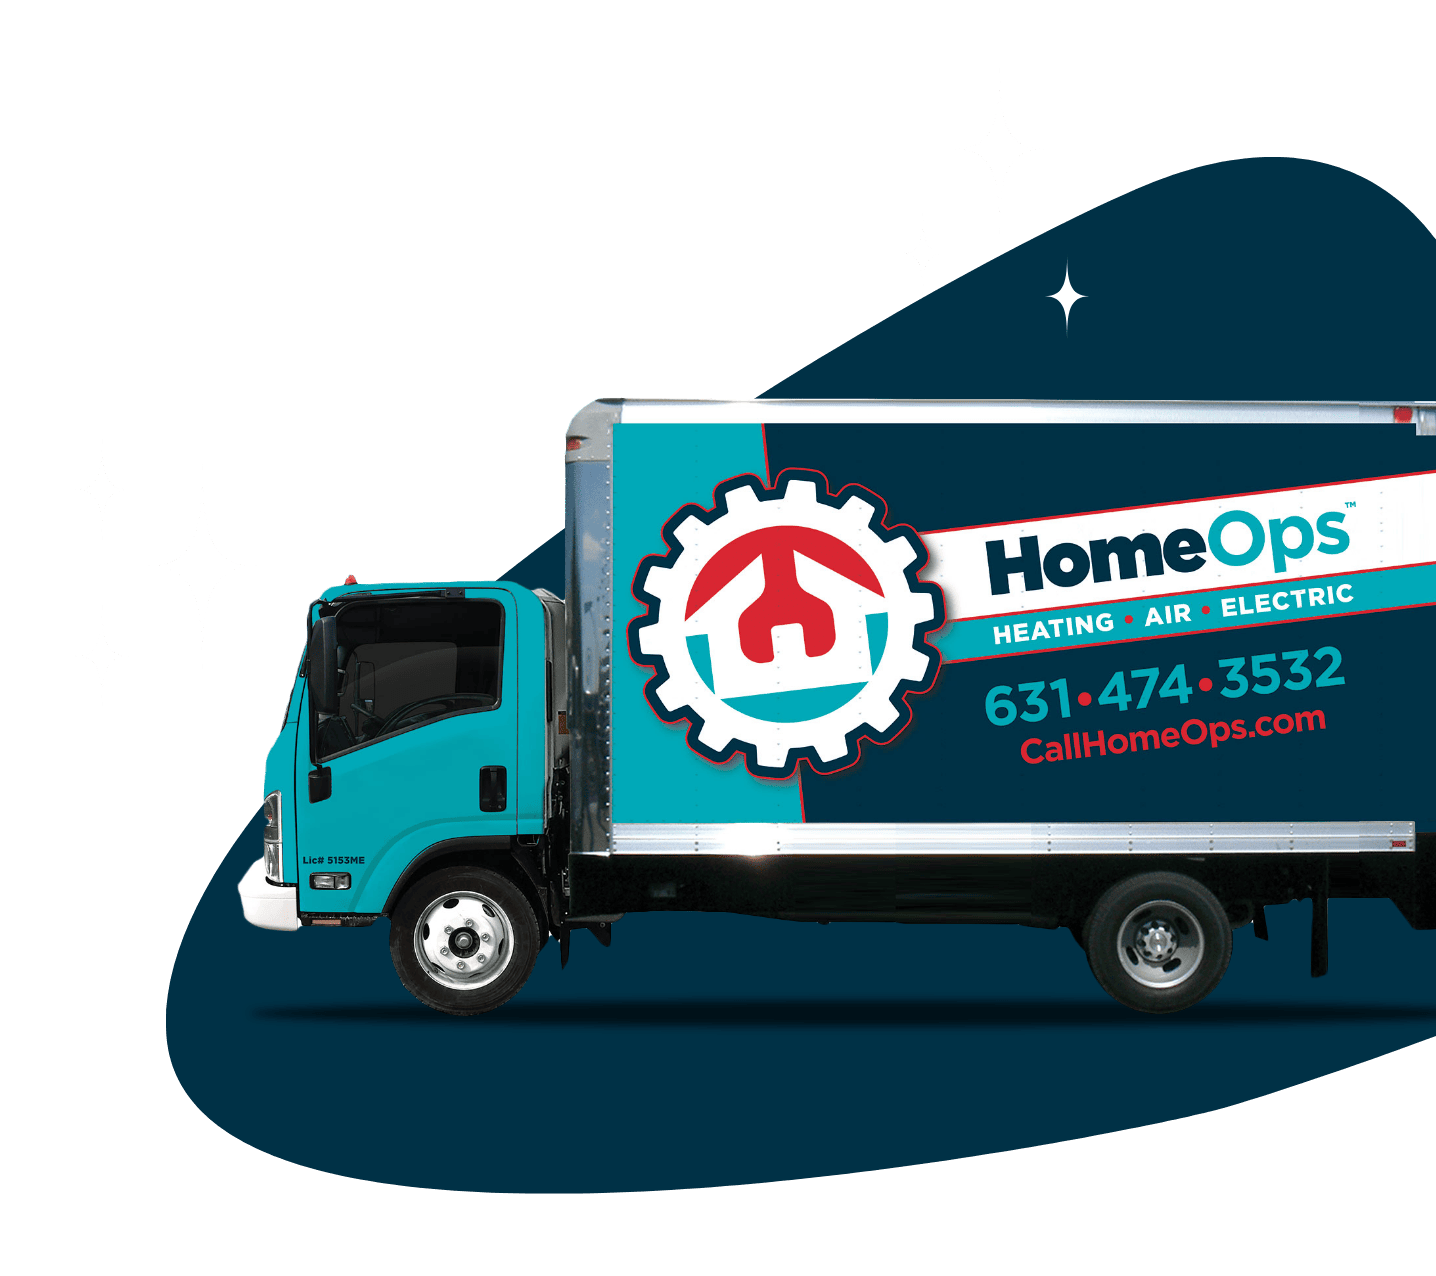 HomeOps service truck.